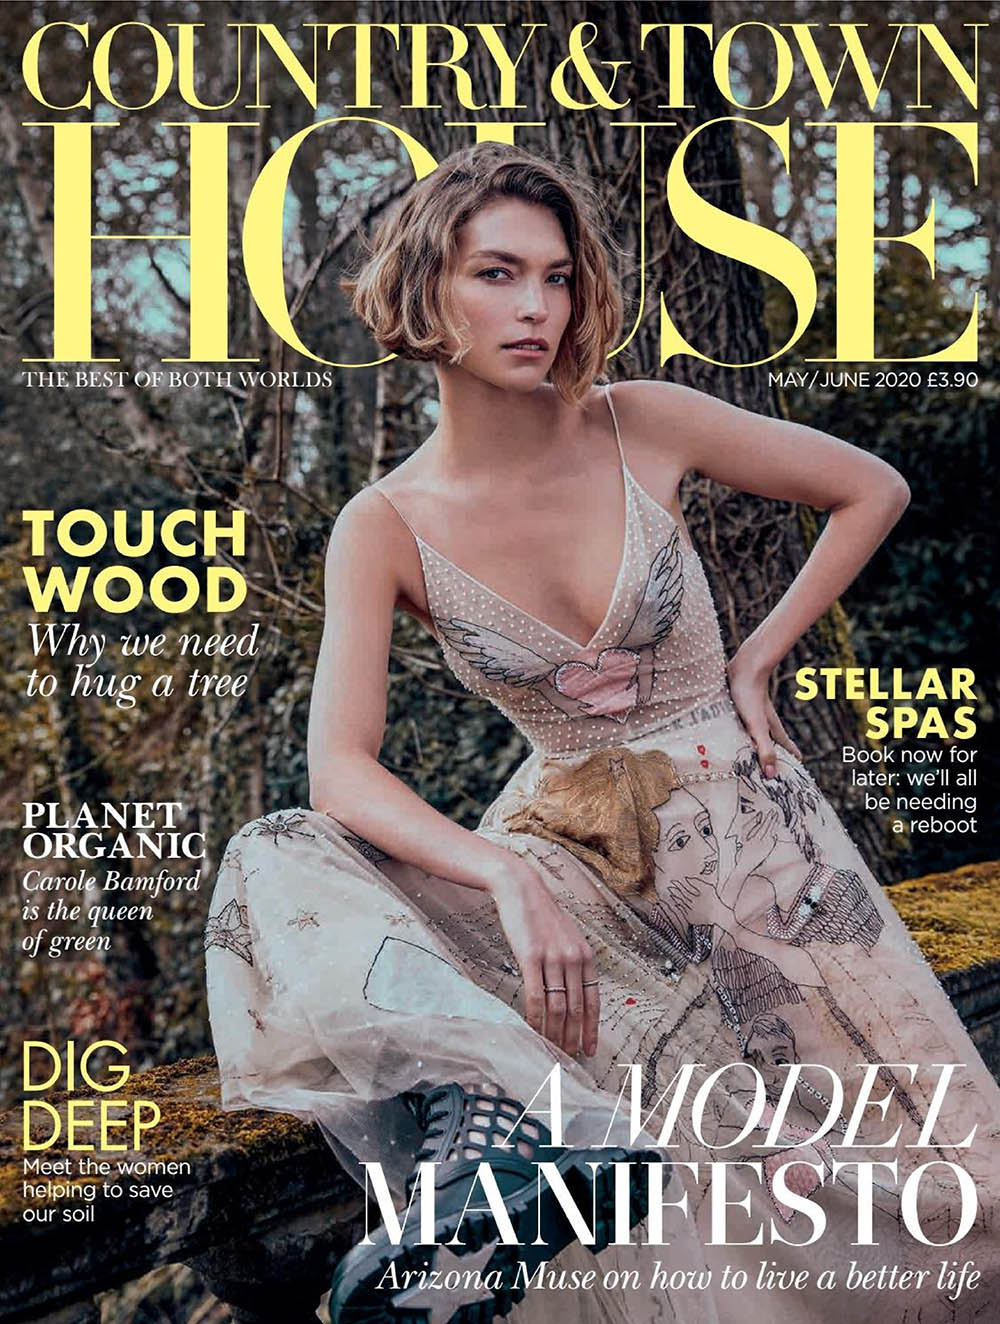 Arizona Muse covers Country & Town House May June 2020 by Carla Guler